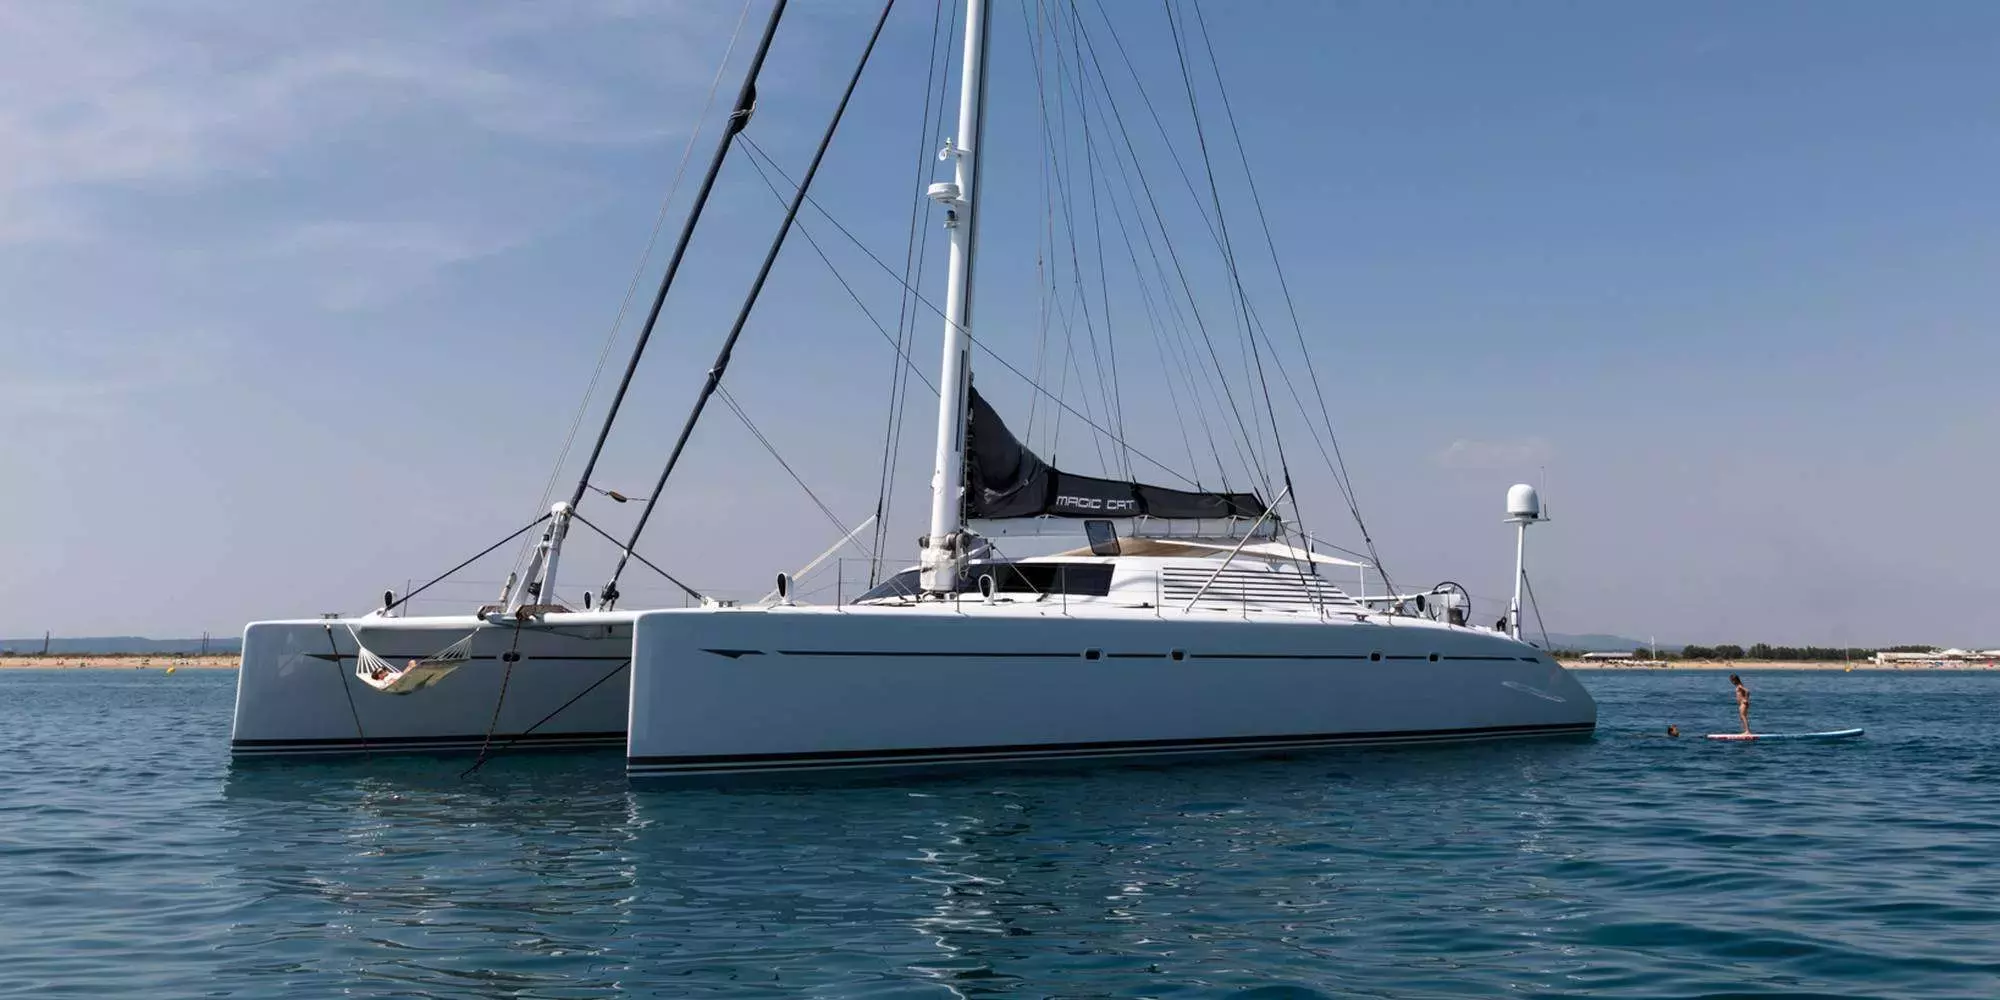 Magic Cat by Multiplast - Top rates for a Charter of a private Luxury Catamaran in St Martin